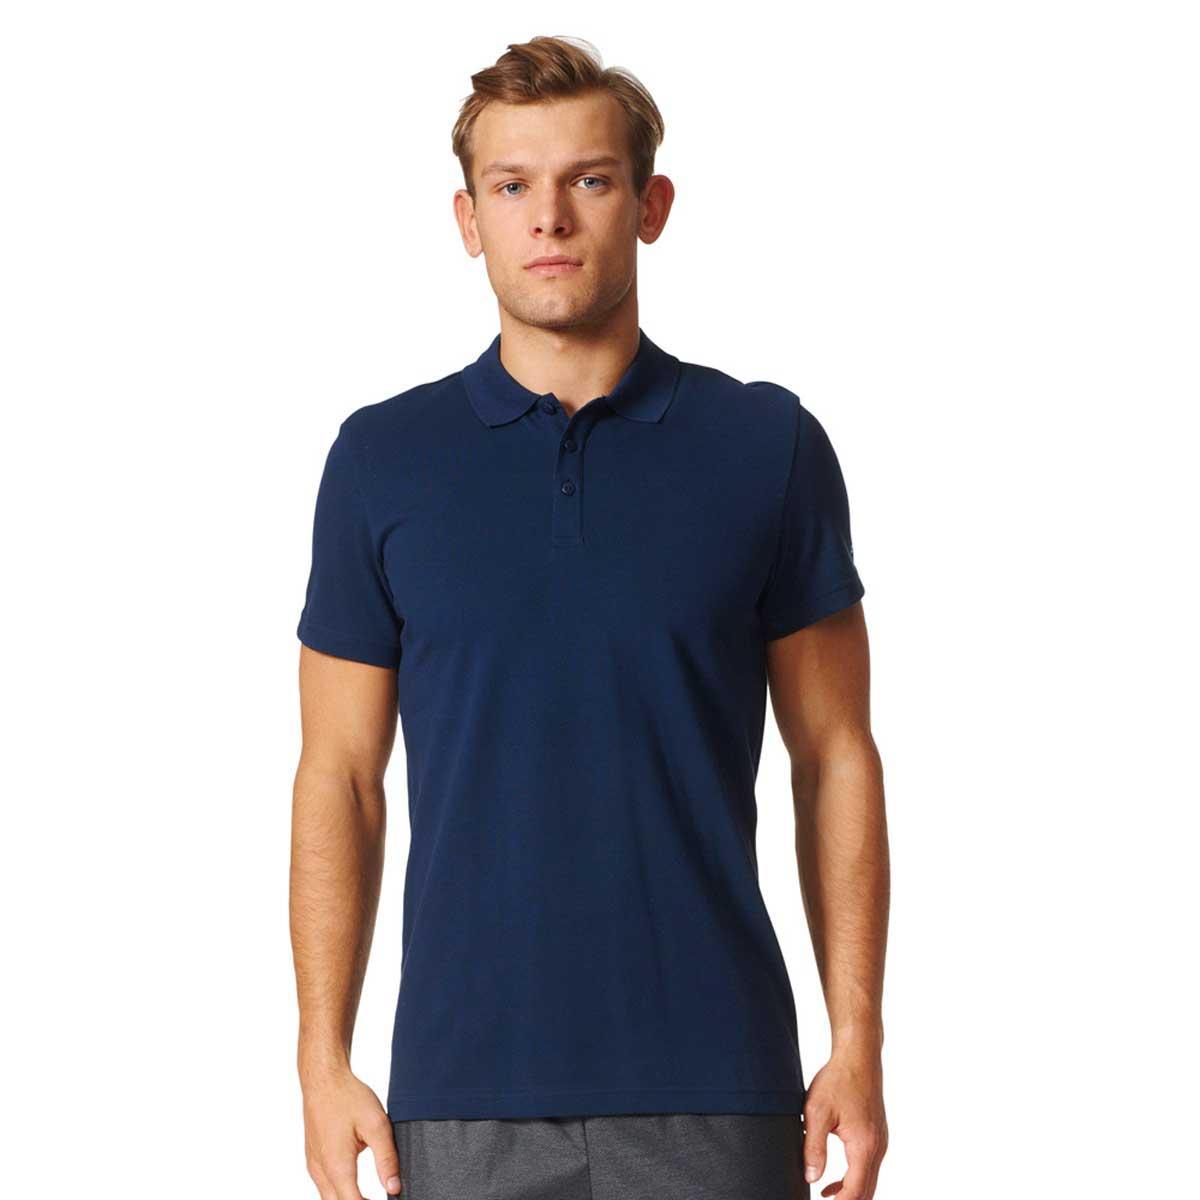 Buy Adidas Mens Essential Base Polo T-Shirts Online at Lowest Price in